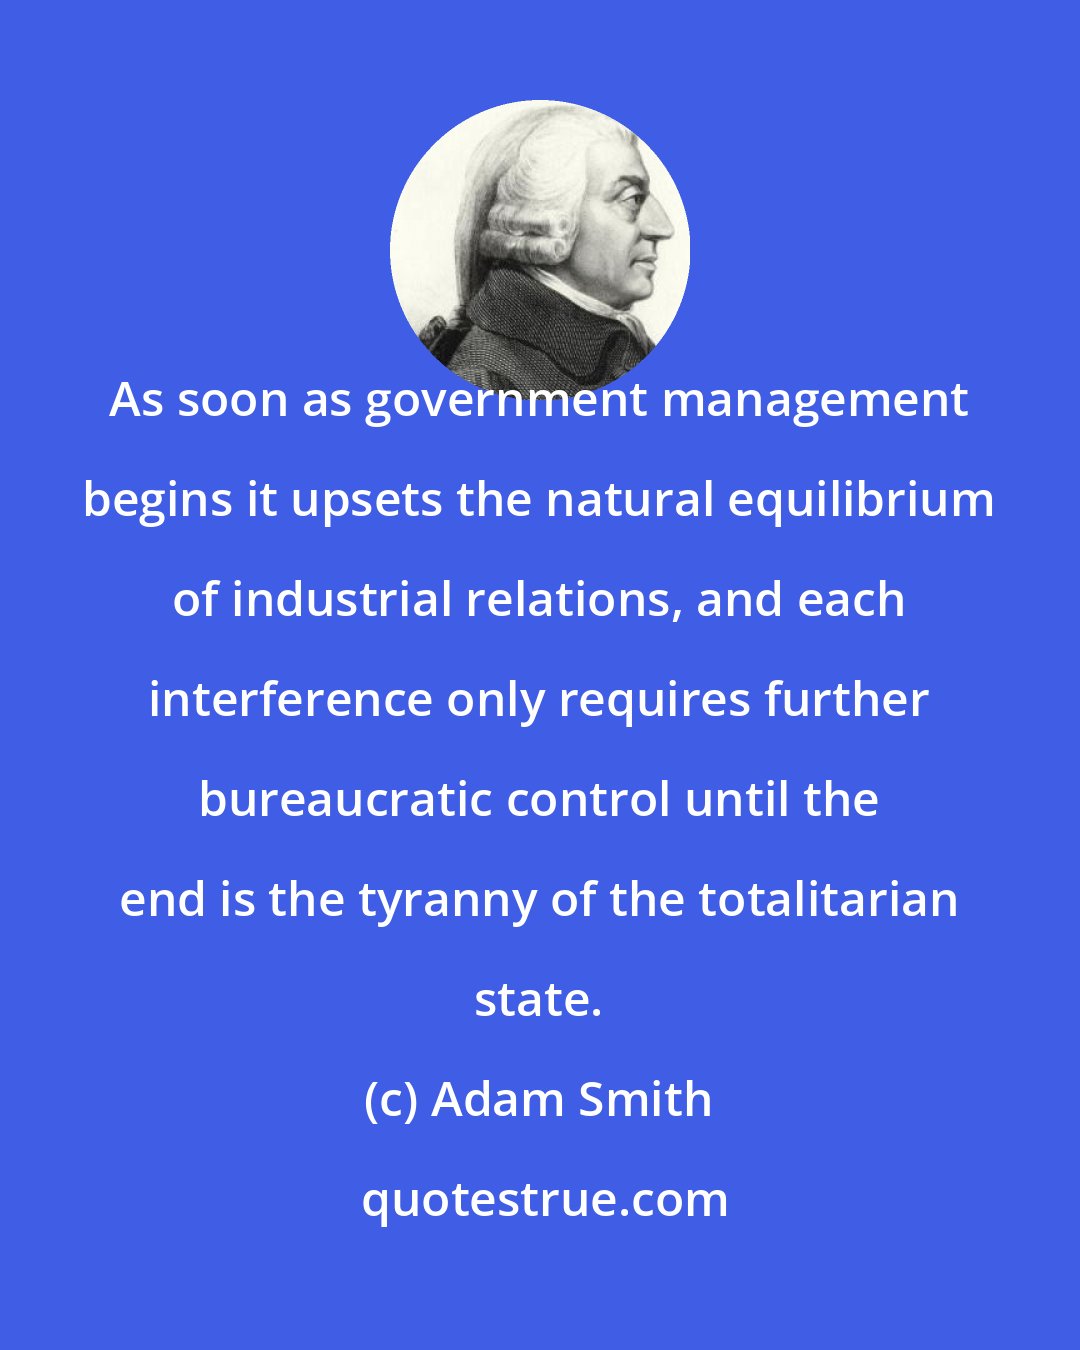 Adam Smith: As soon as government management begins it upsets the natural equilibrium of industrial relations, and each interference only requires further bureaucratic control until the end is the tyranny of the totalitarian state.